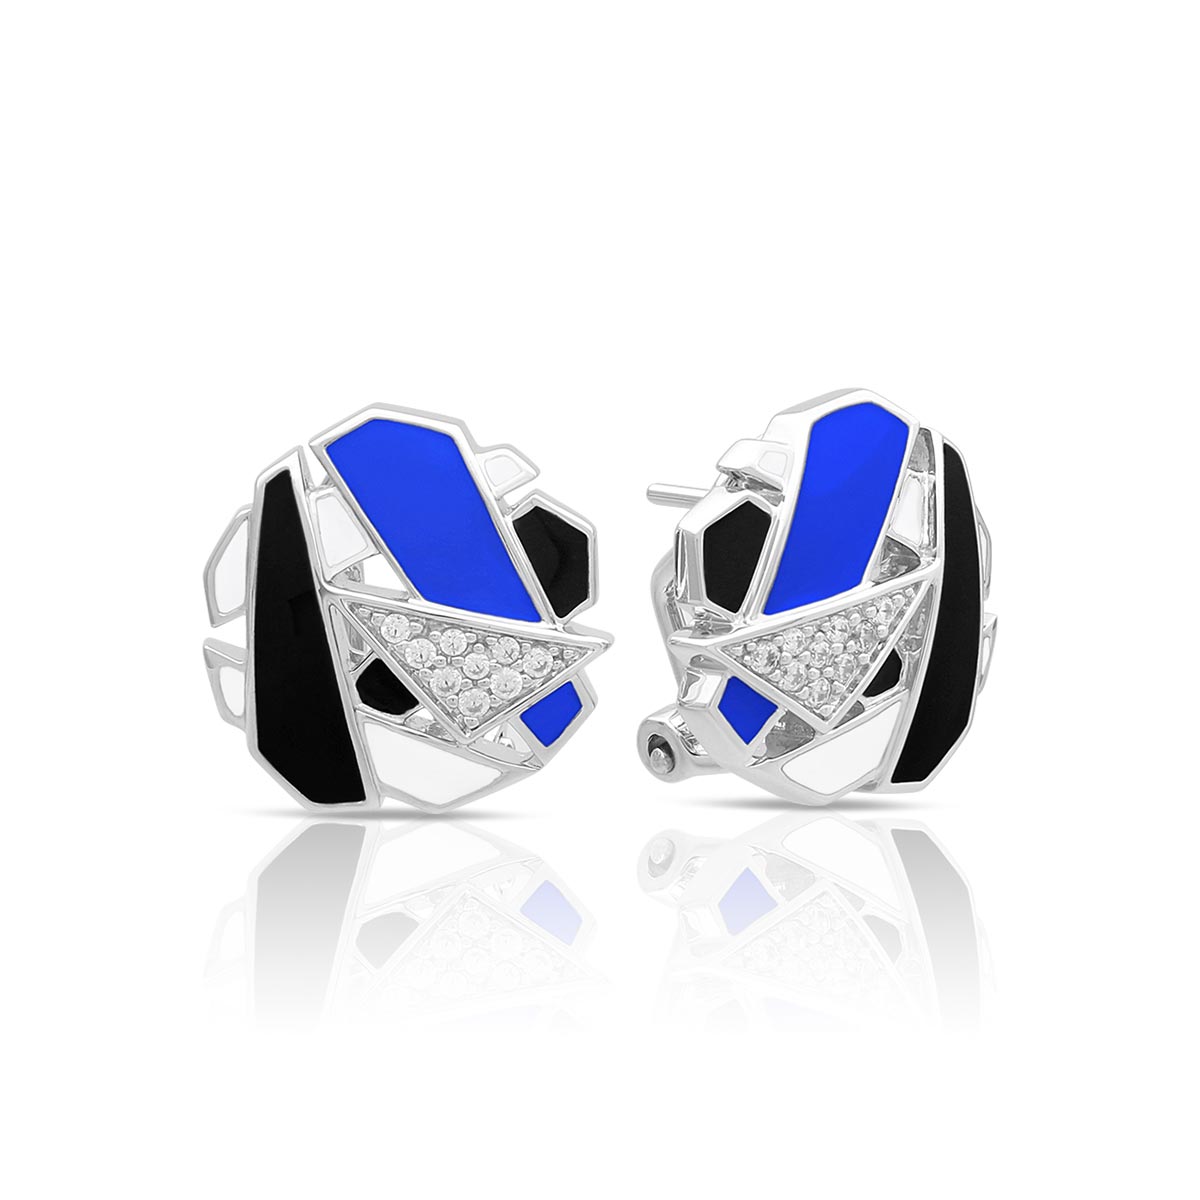 Blue, black and white enamel with white and black zirconias earrings in sterling silver by Belle Etoile